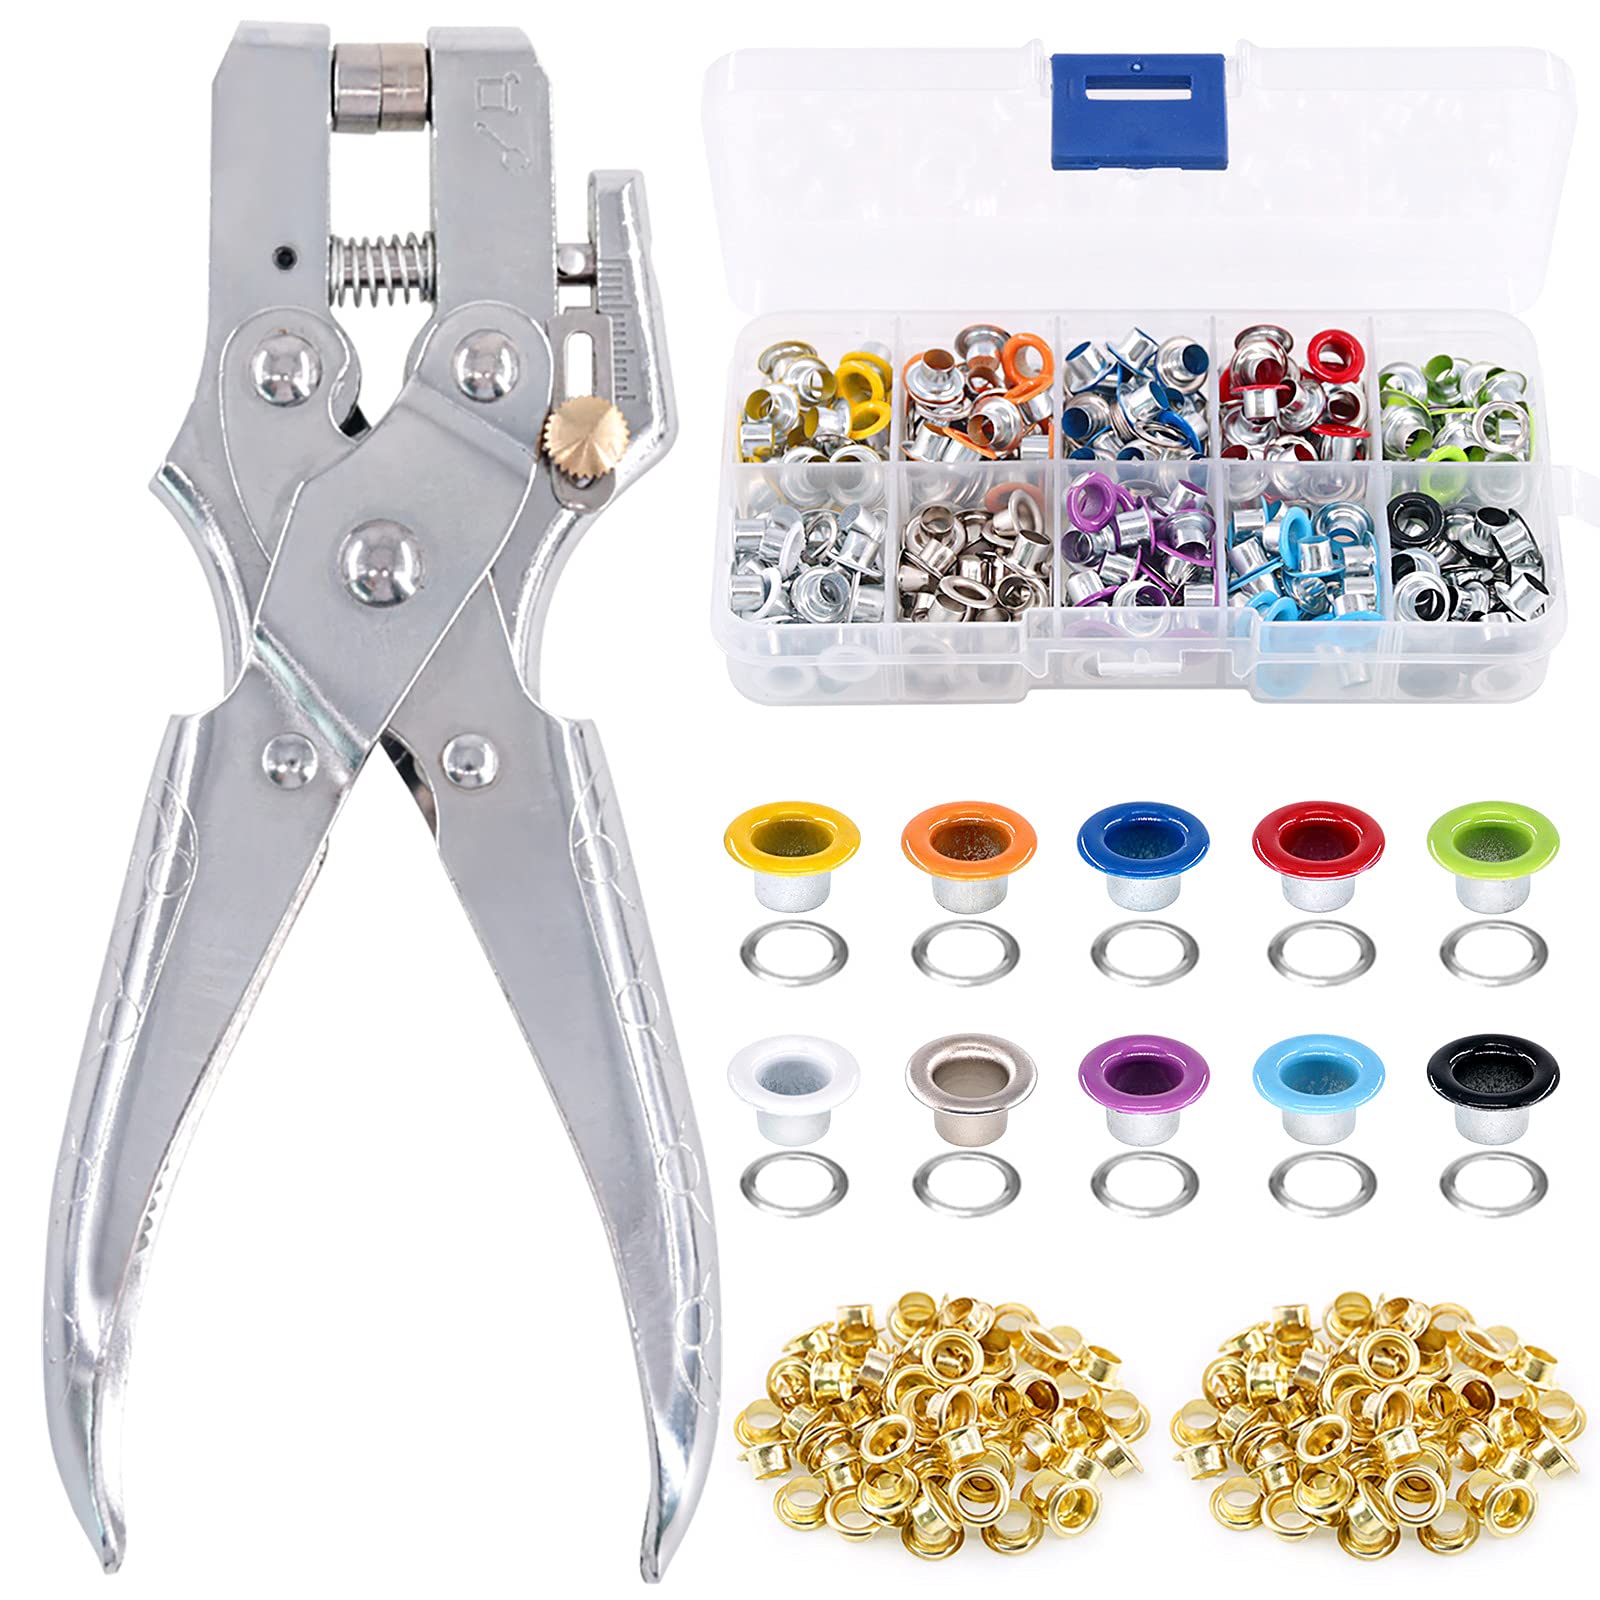 Swpeet 300Pcs 10 Colors 3/16 inch Metal Grommets Kit and 1Pcs Eyelet Hole  Punch Pliers with 100Pcs Gold Grommets, Metal Eyelets Kits Shoe Eyelets